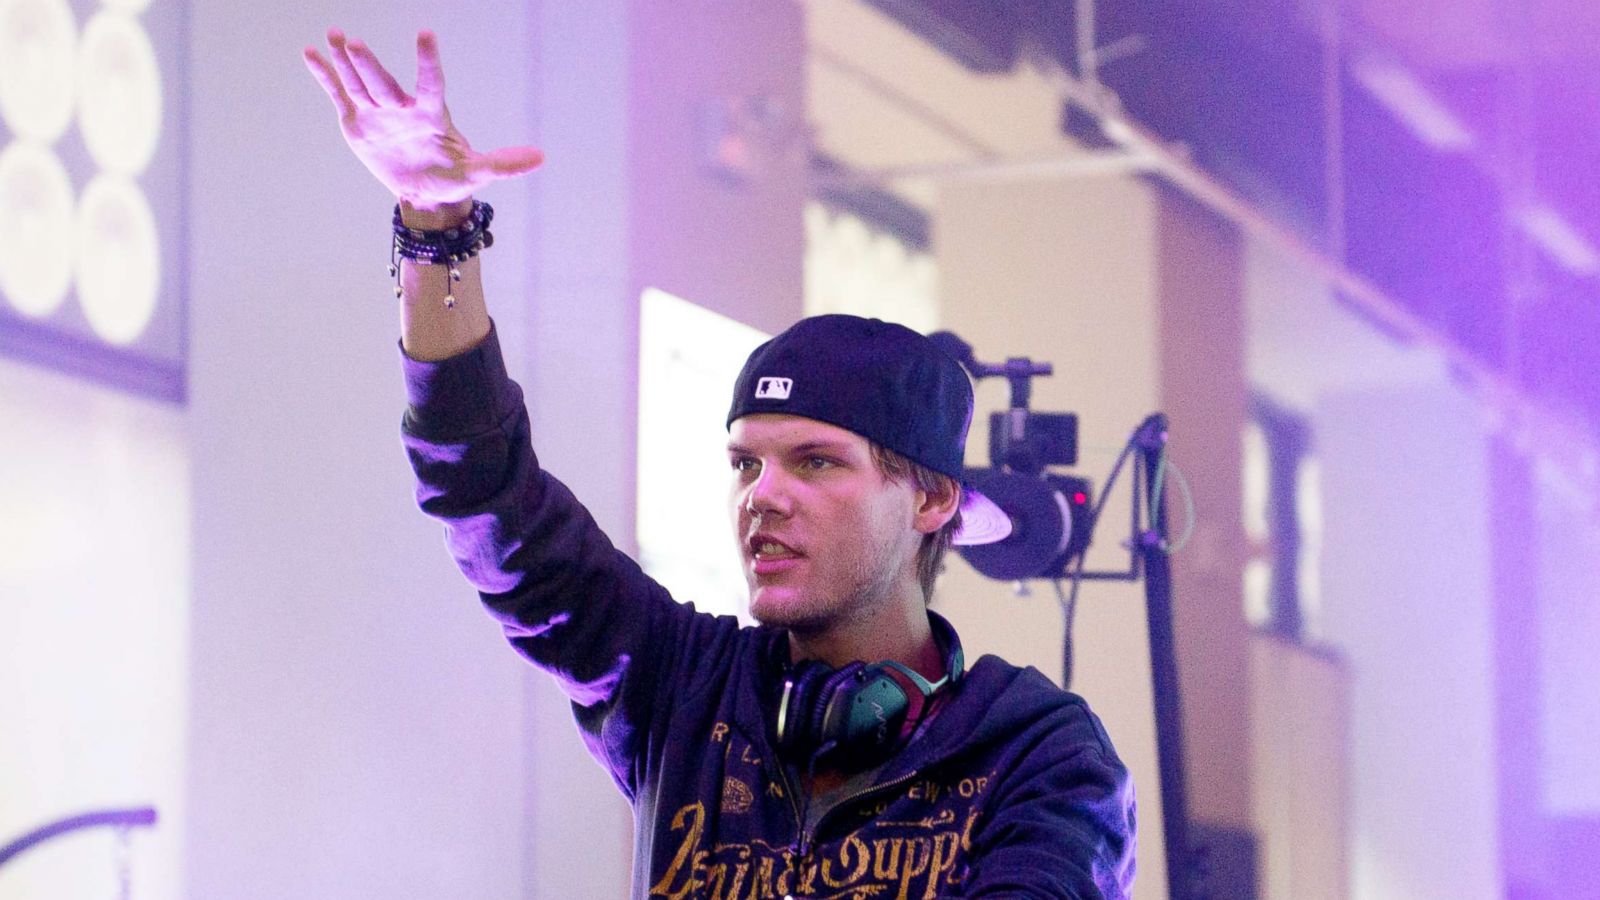 PHOTO: Avicii performs at the MLB Fan Cave on Oct. 1, 2013, in New York City.